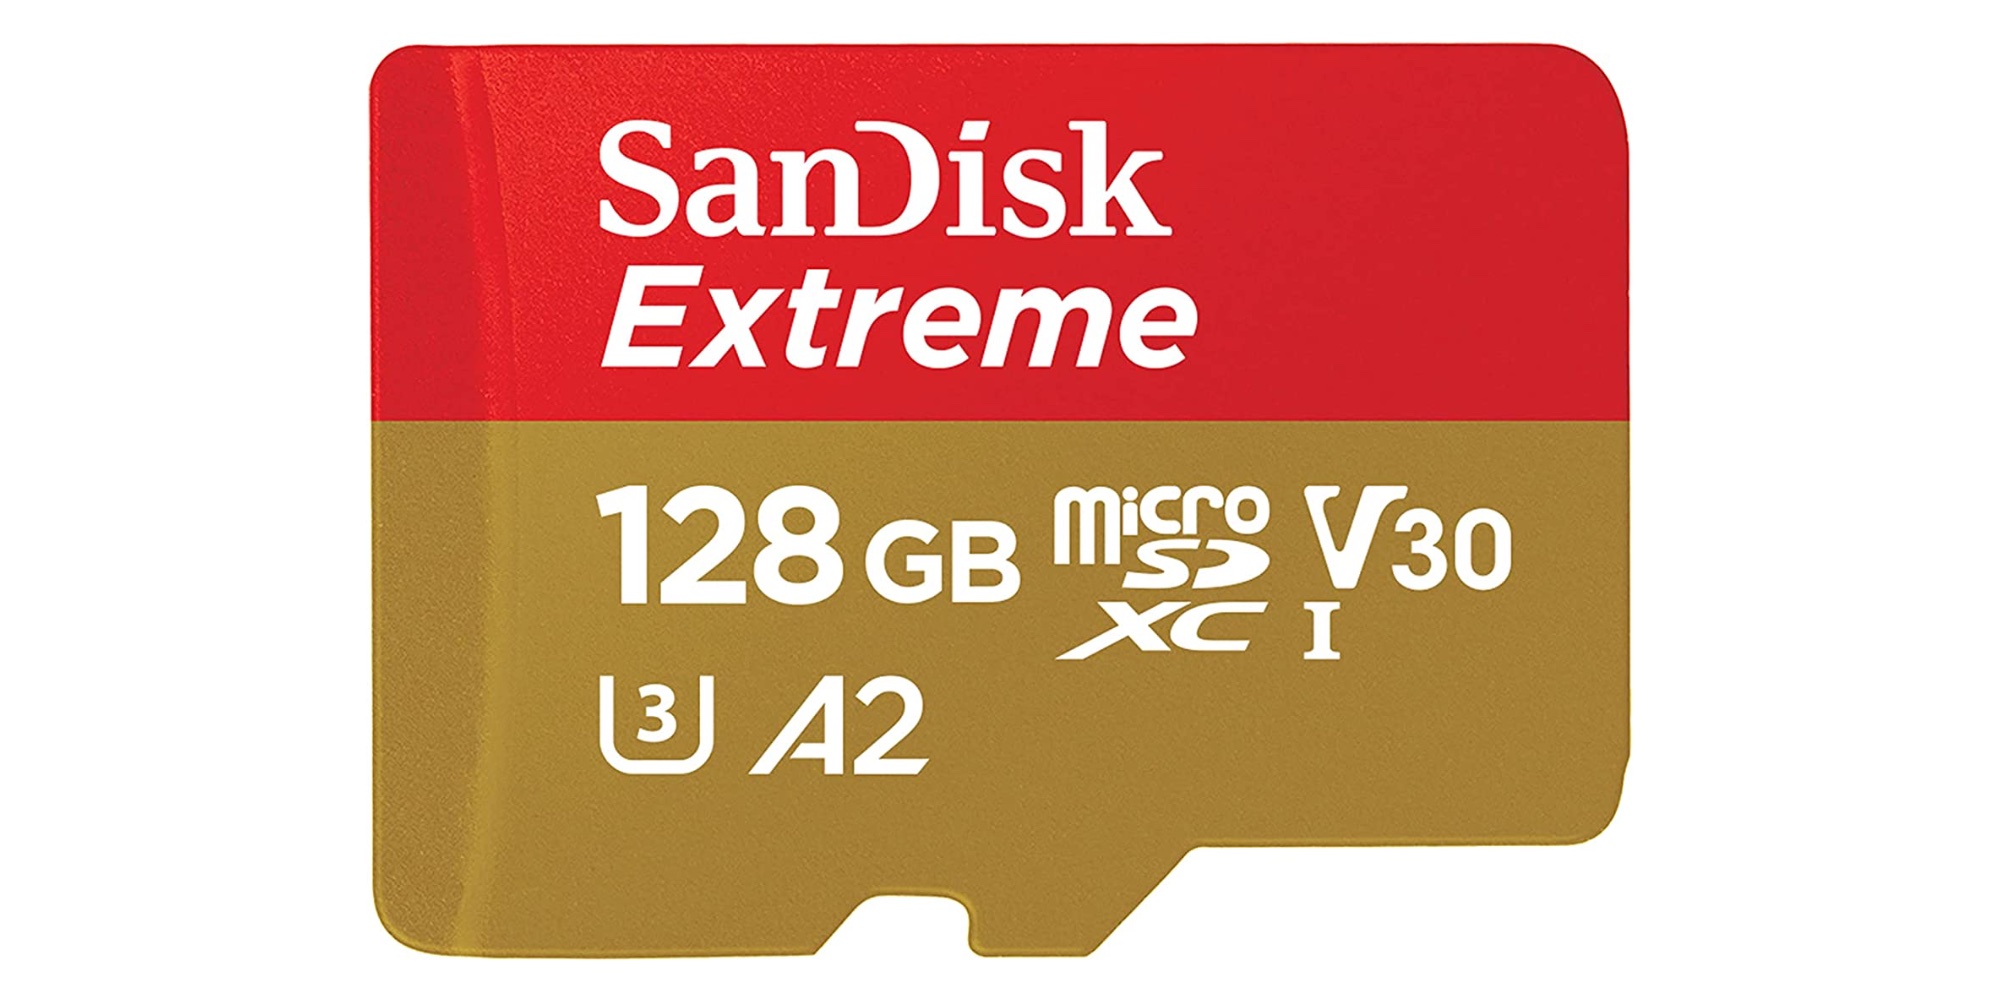 This $14 microSD card can add 128GB to your phone or Nintendo Switch